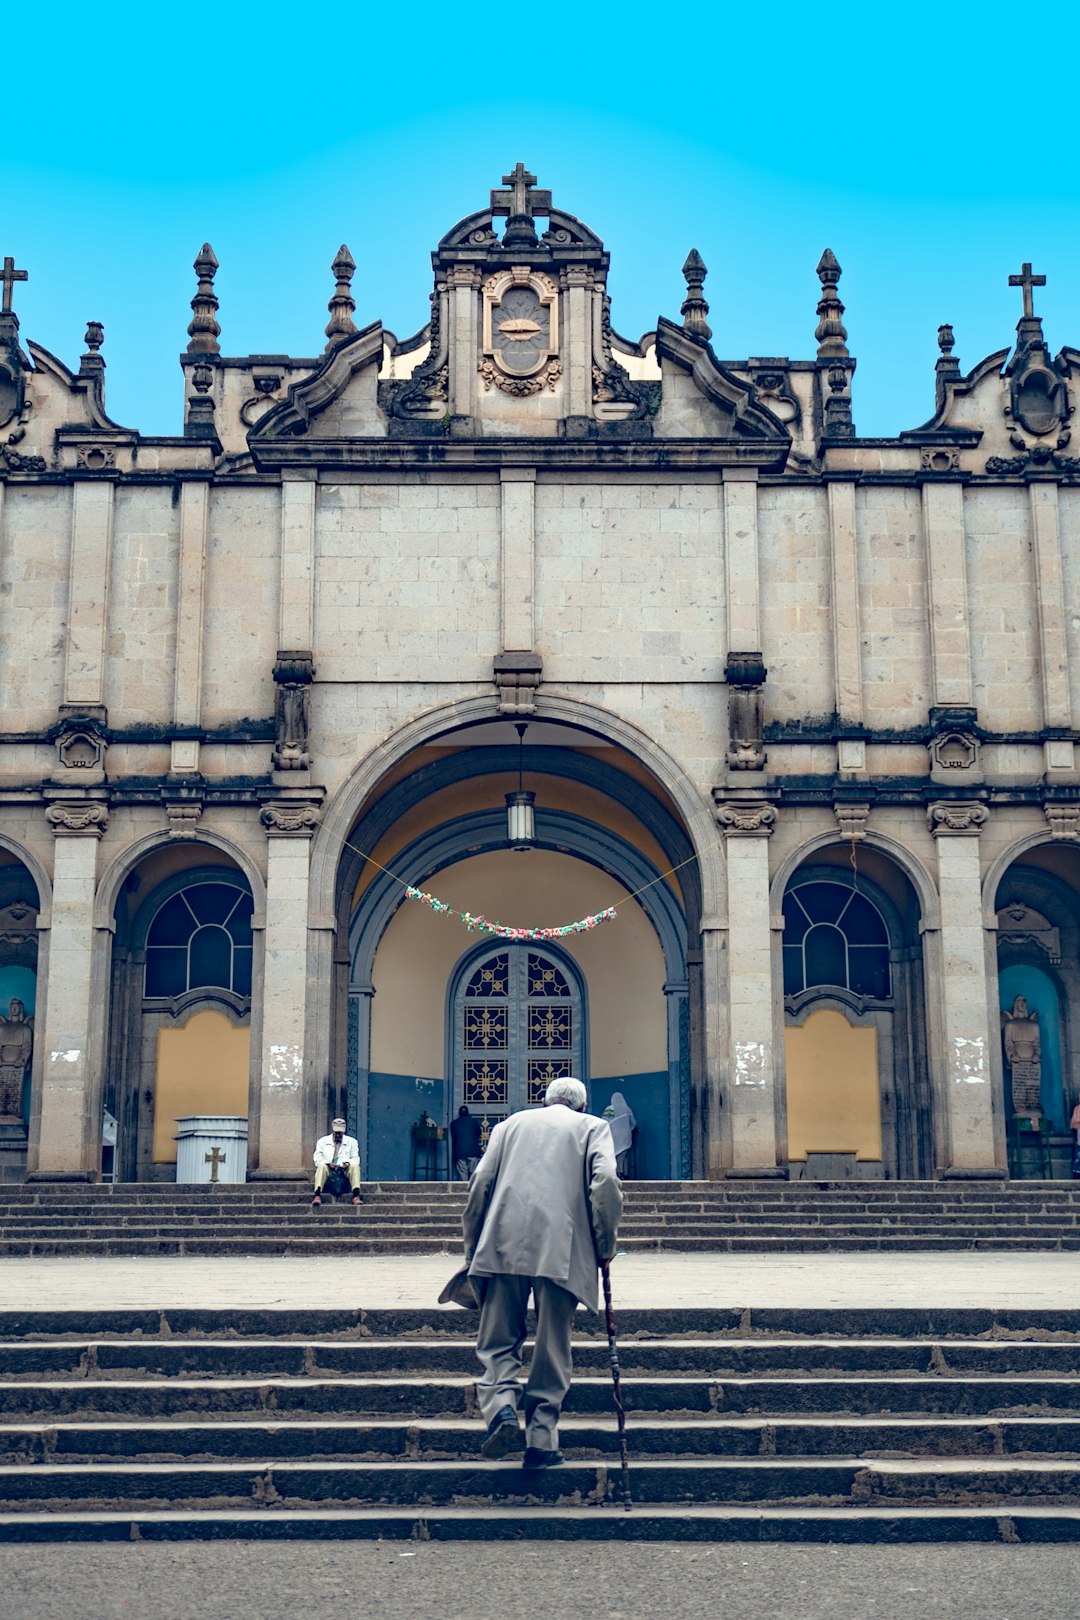 Architecture photo spot Holy Trinity Cathedral Addis Ababa